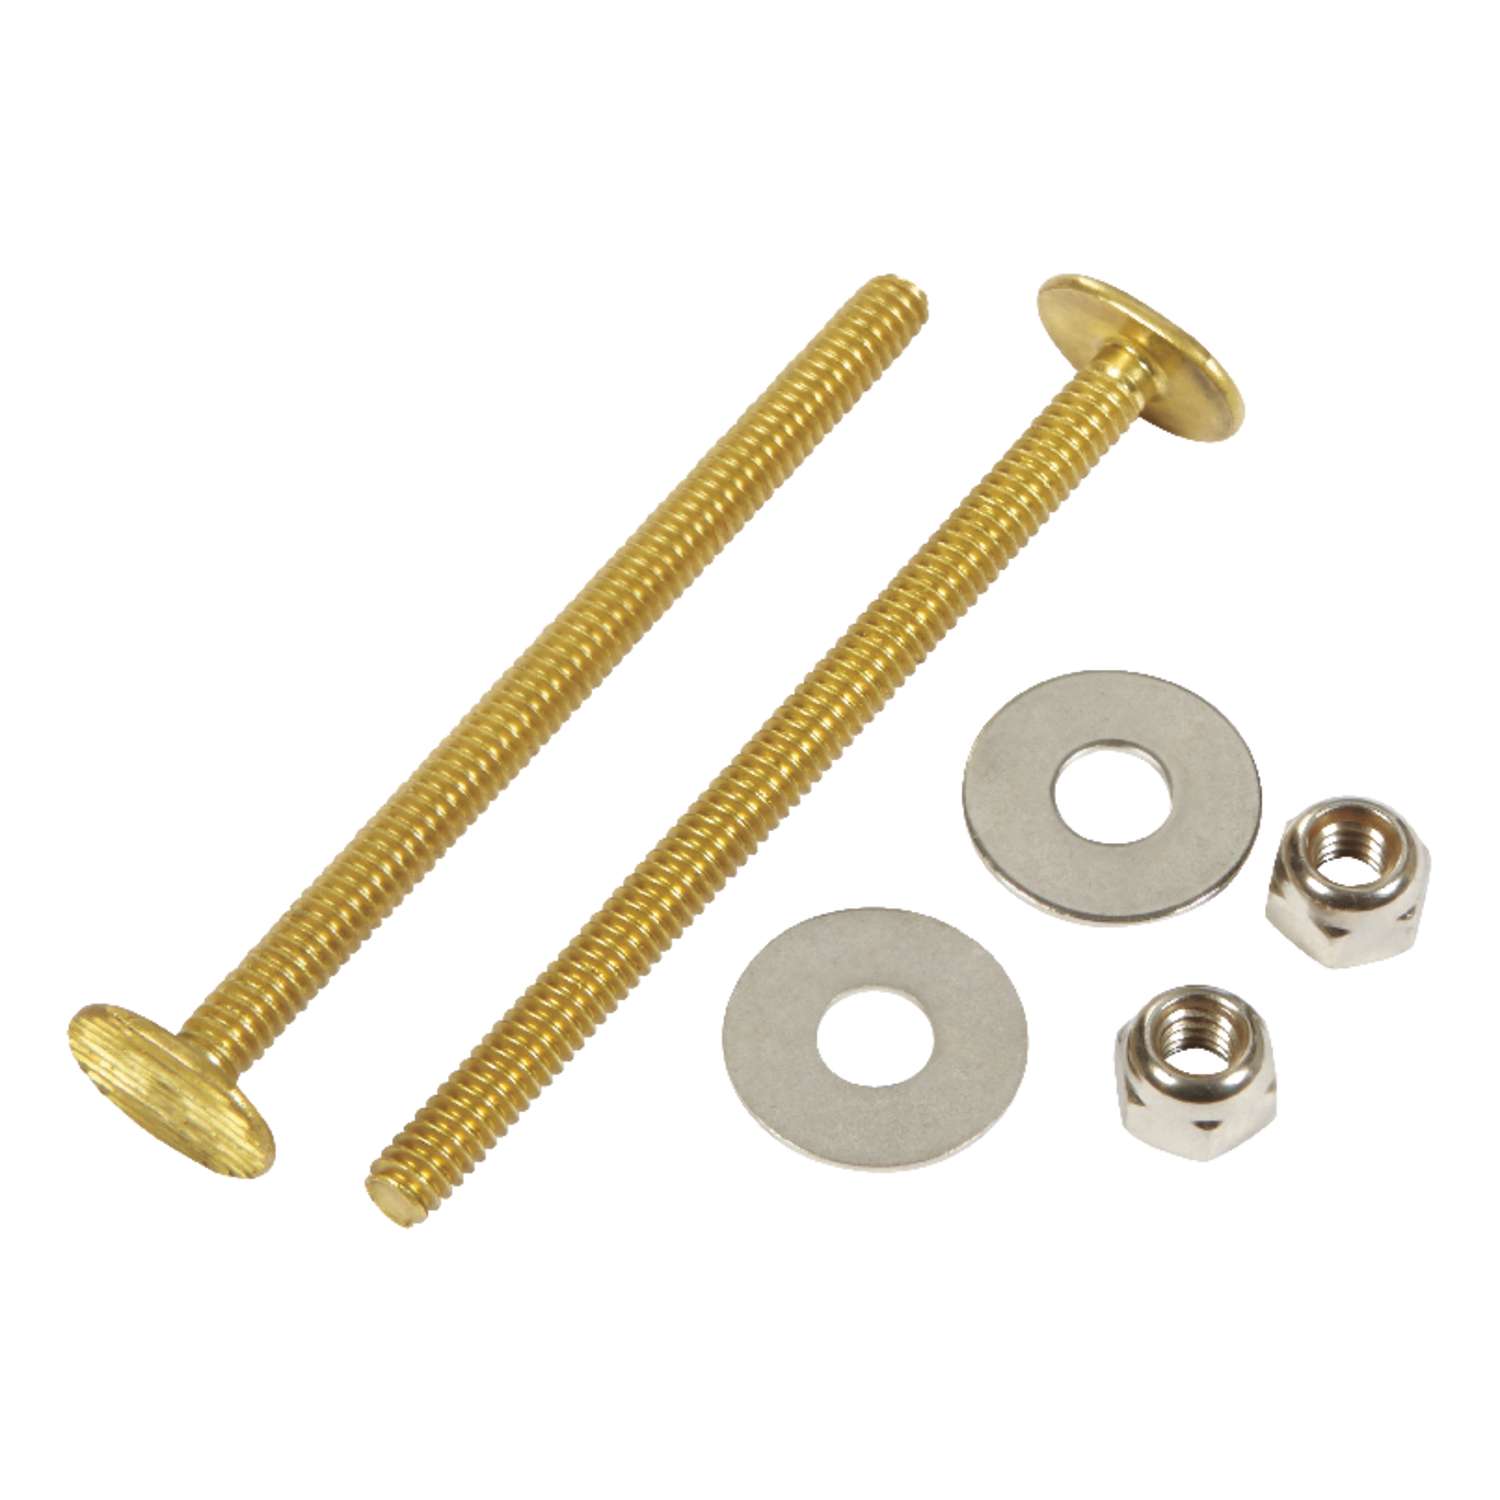 Joanna's Bag Spa - Brass is a common hardware that we find on most